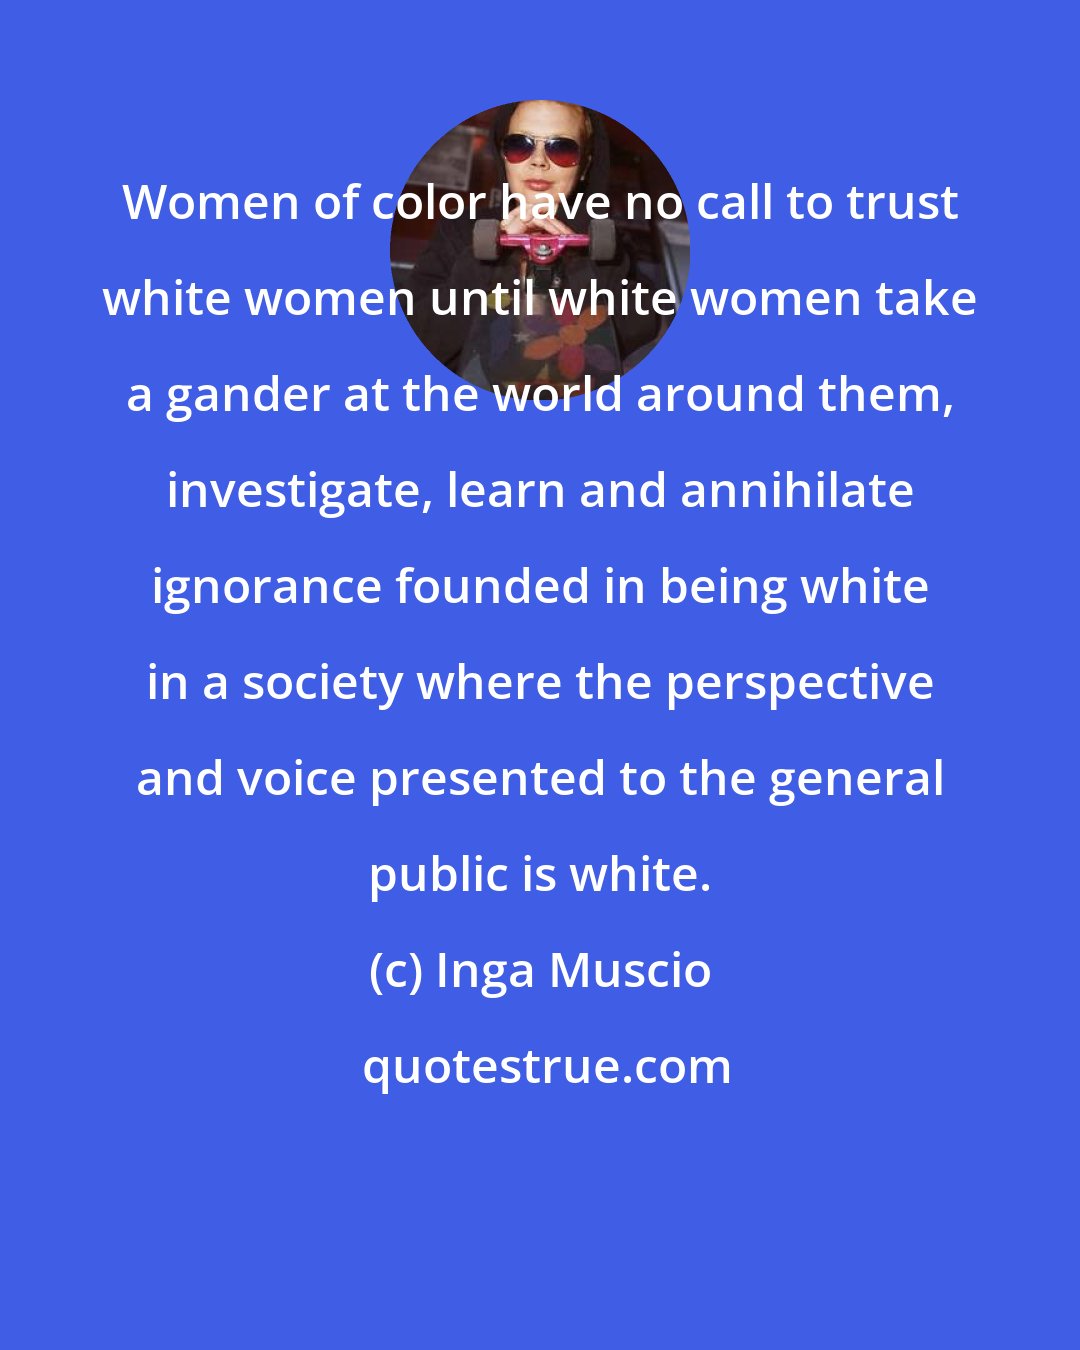 Inga Muscio: Women of color have no call to trust white women until white women take a gander at the world around them, investigate, learn and annihilate ignorance founded in being white in a society where the perspective and voice presented to the general public is white.